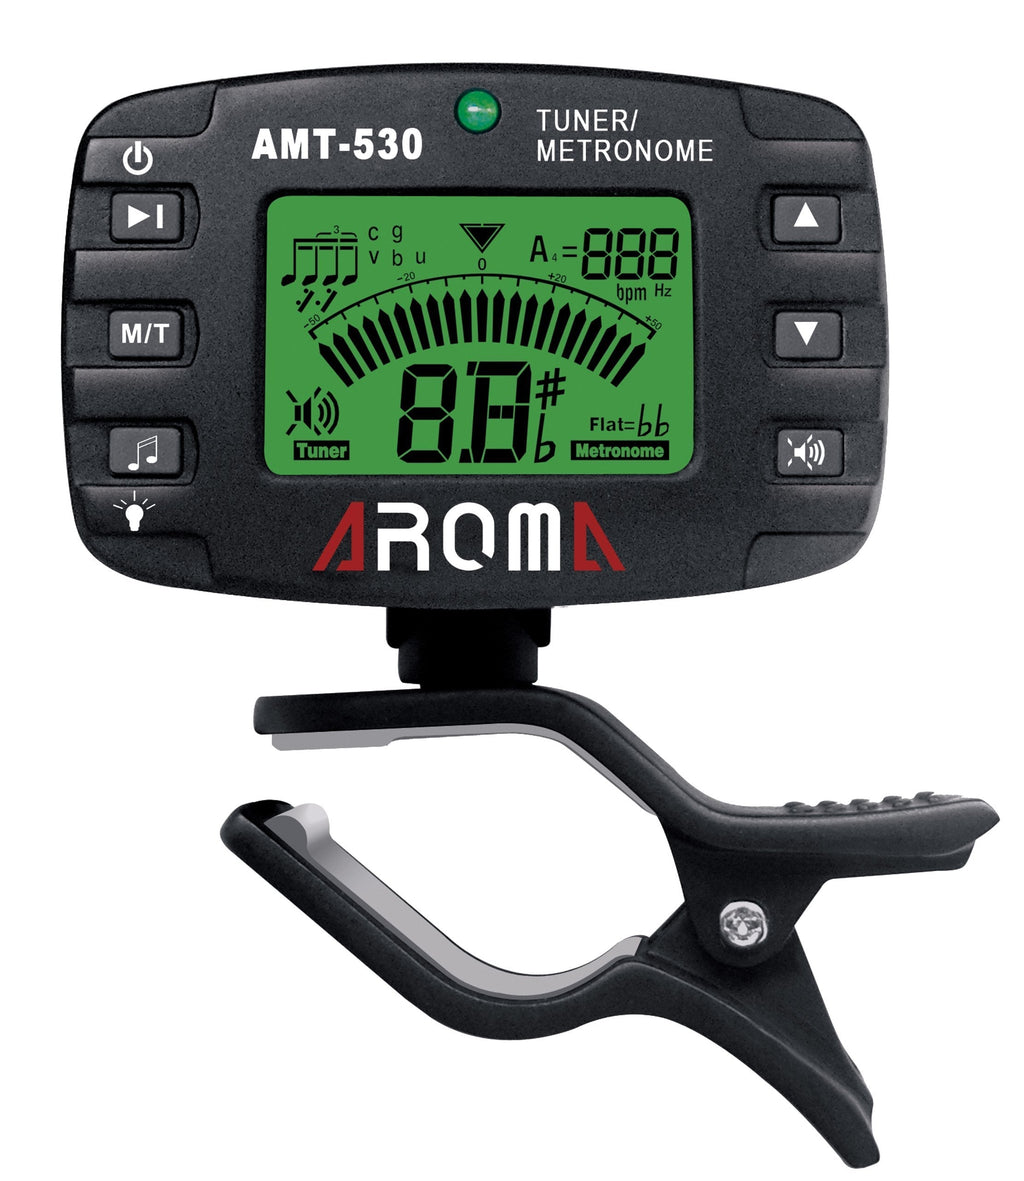 Aroma AMT-530 Clip-On Chromatic Tuner and Metronome